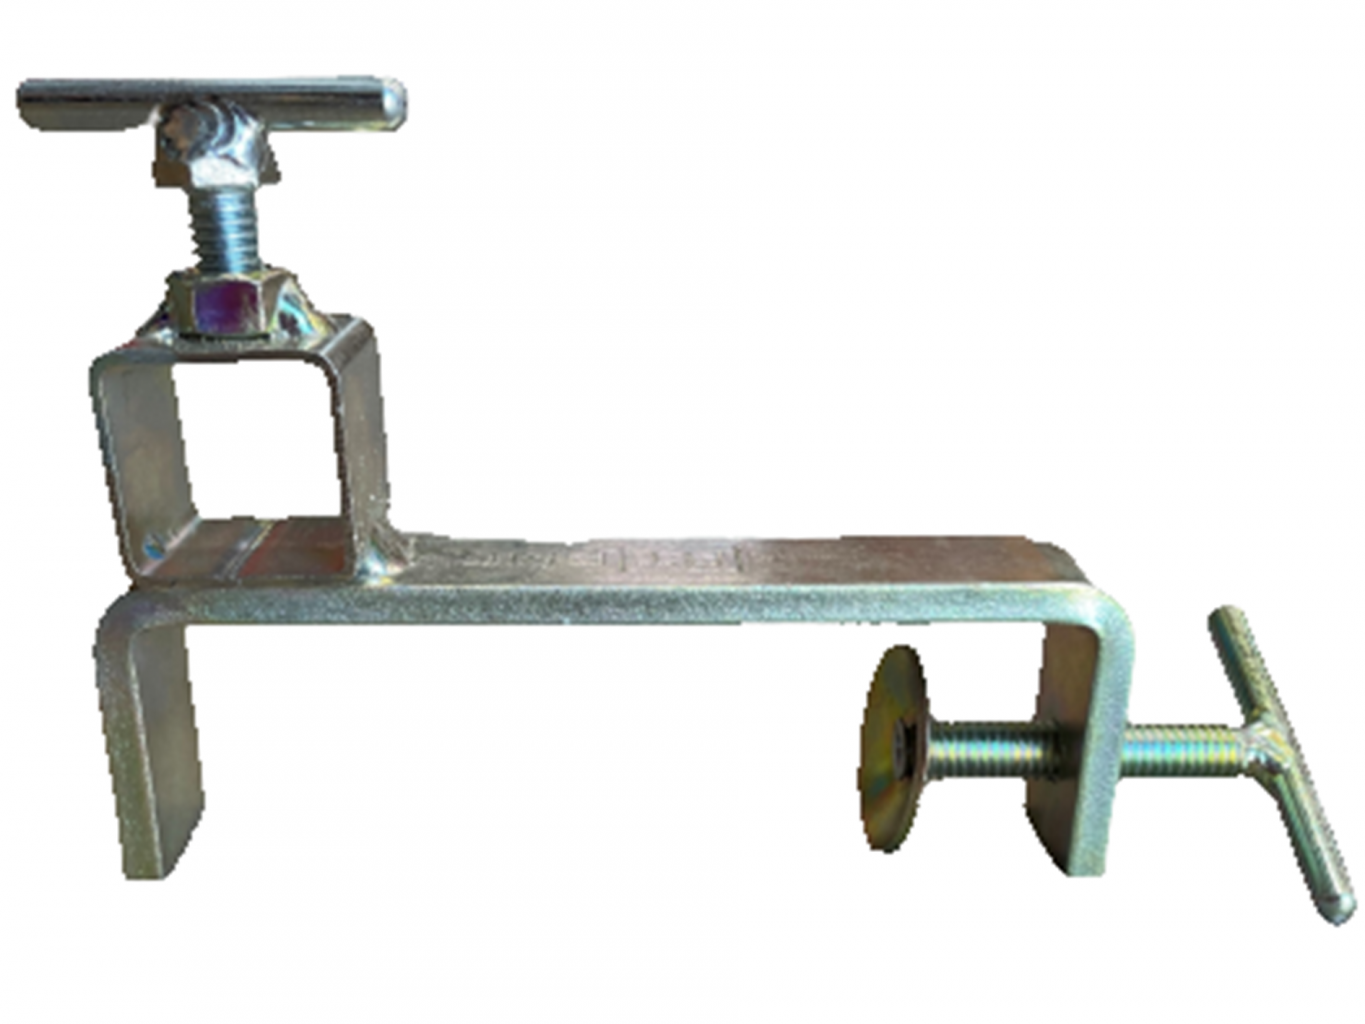 Top Clamp - Internal Double